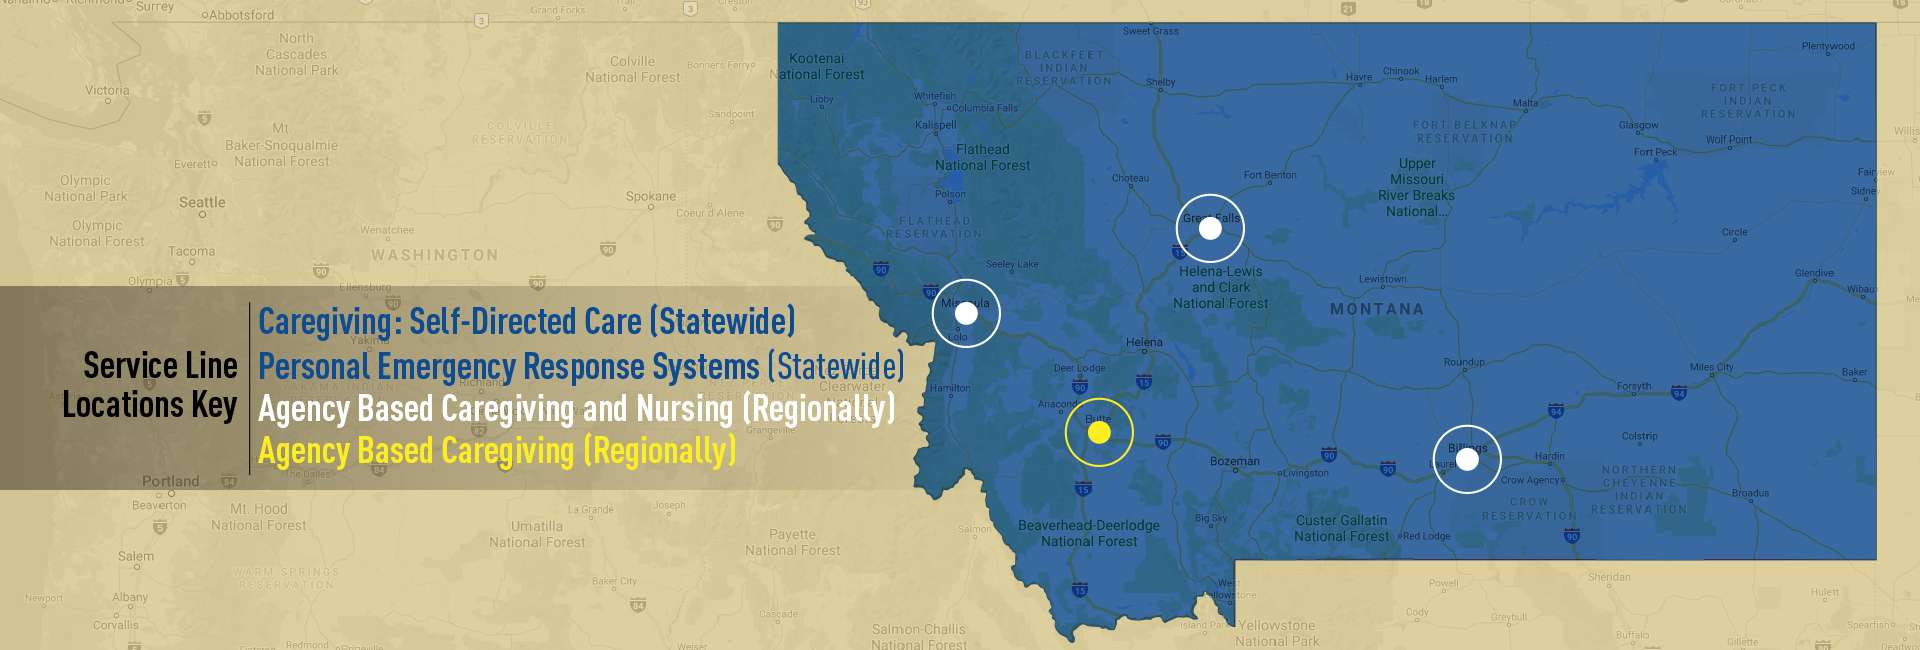 Map of Montana showing areas we provide services. Caregiving: Self Directed Personal Care (Statewide), Personal Emergency Response Systems (Statewide), Agency Based Caregiving and Nursing (Regionally), Agency Based Caregiving (Regionally)